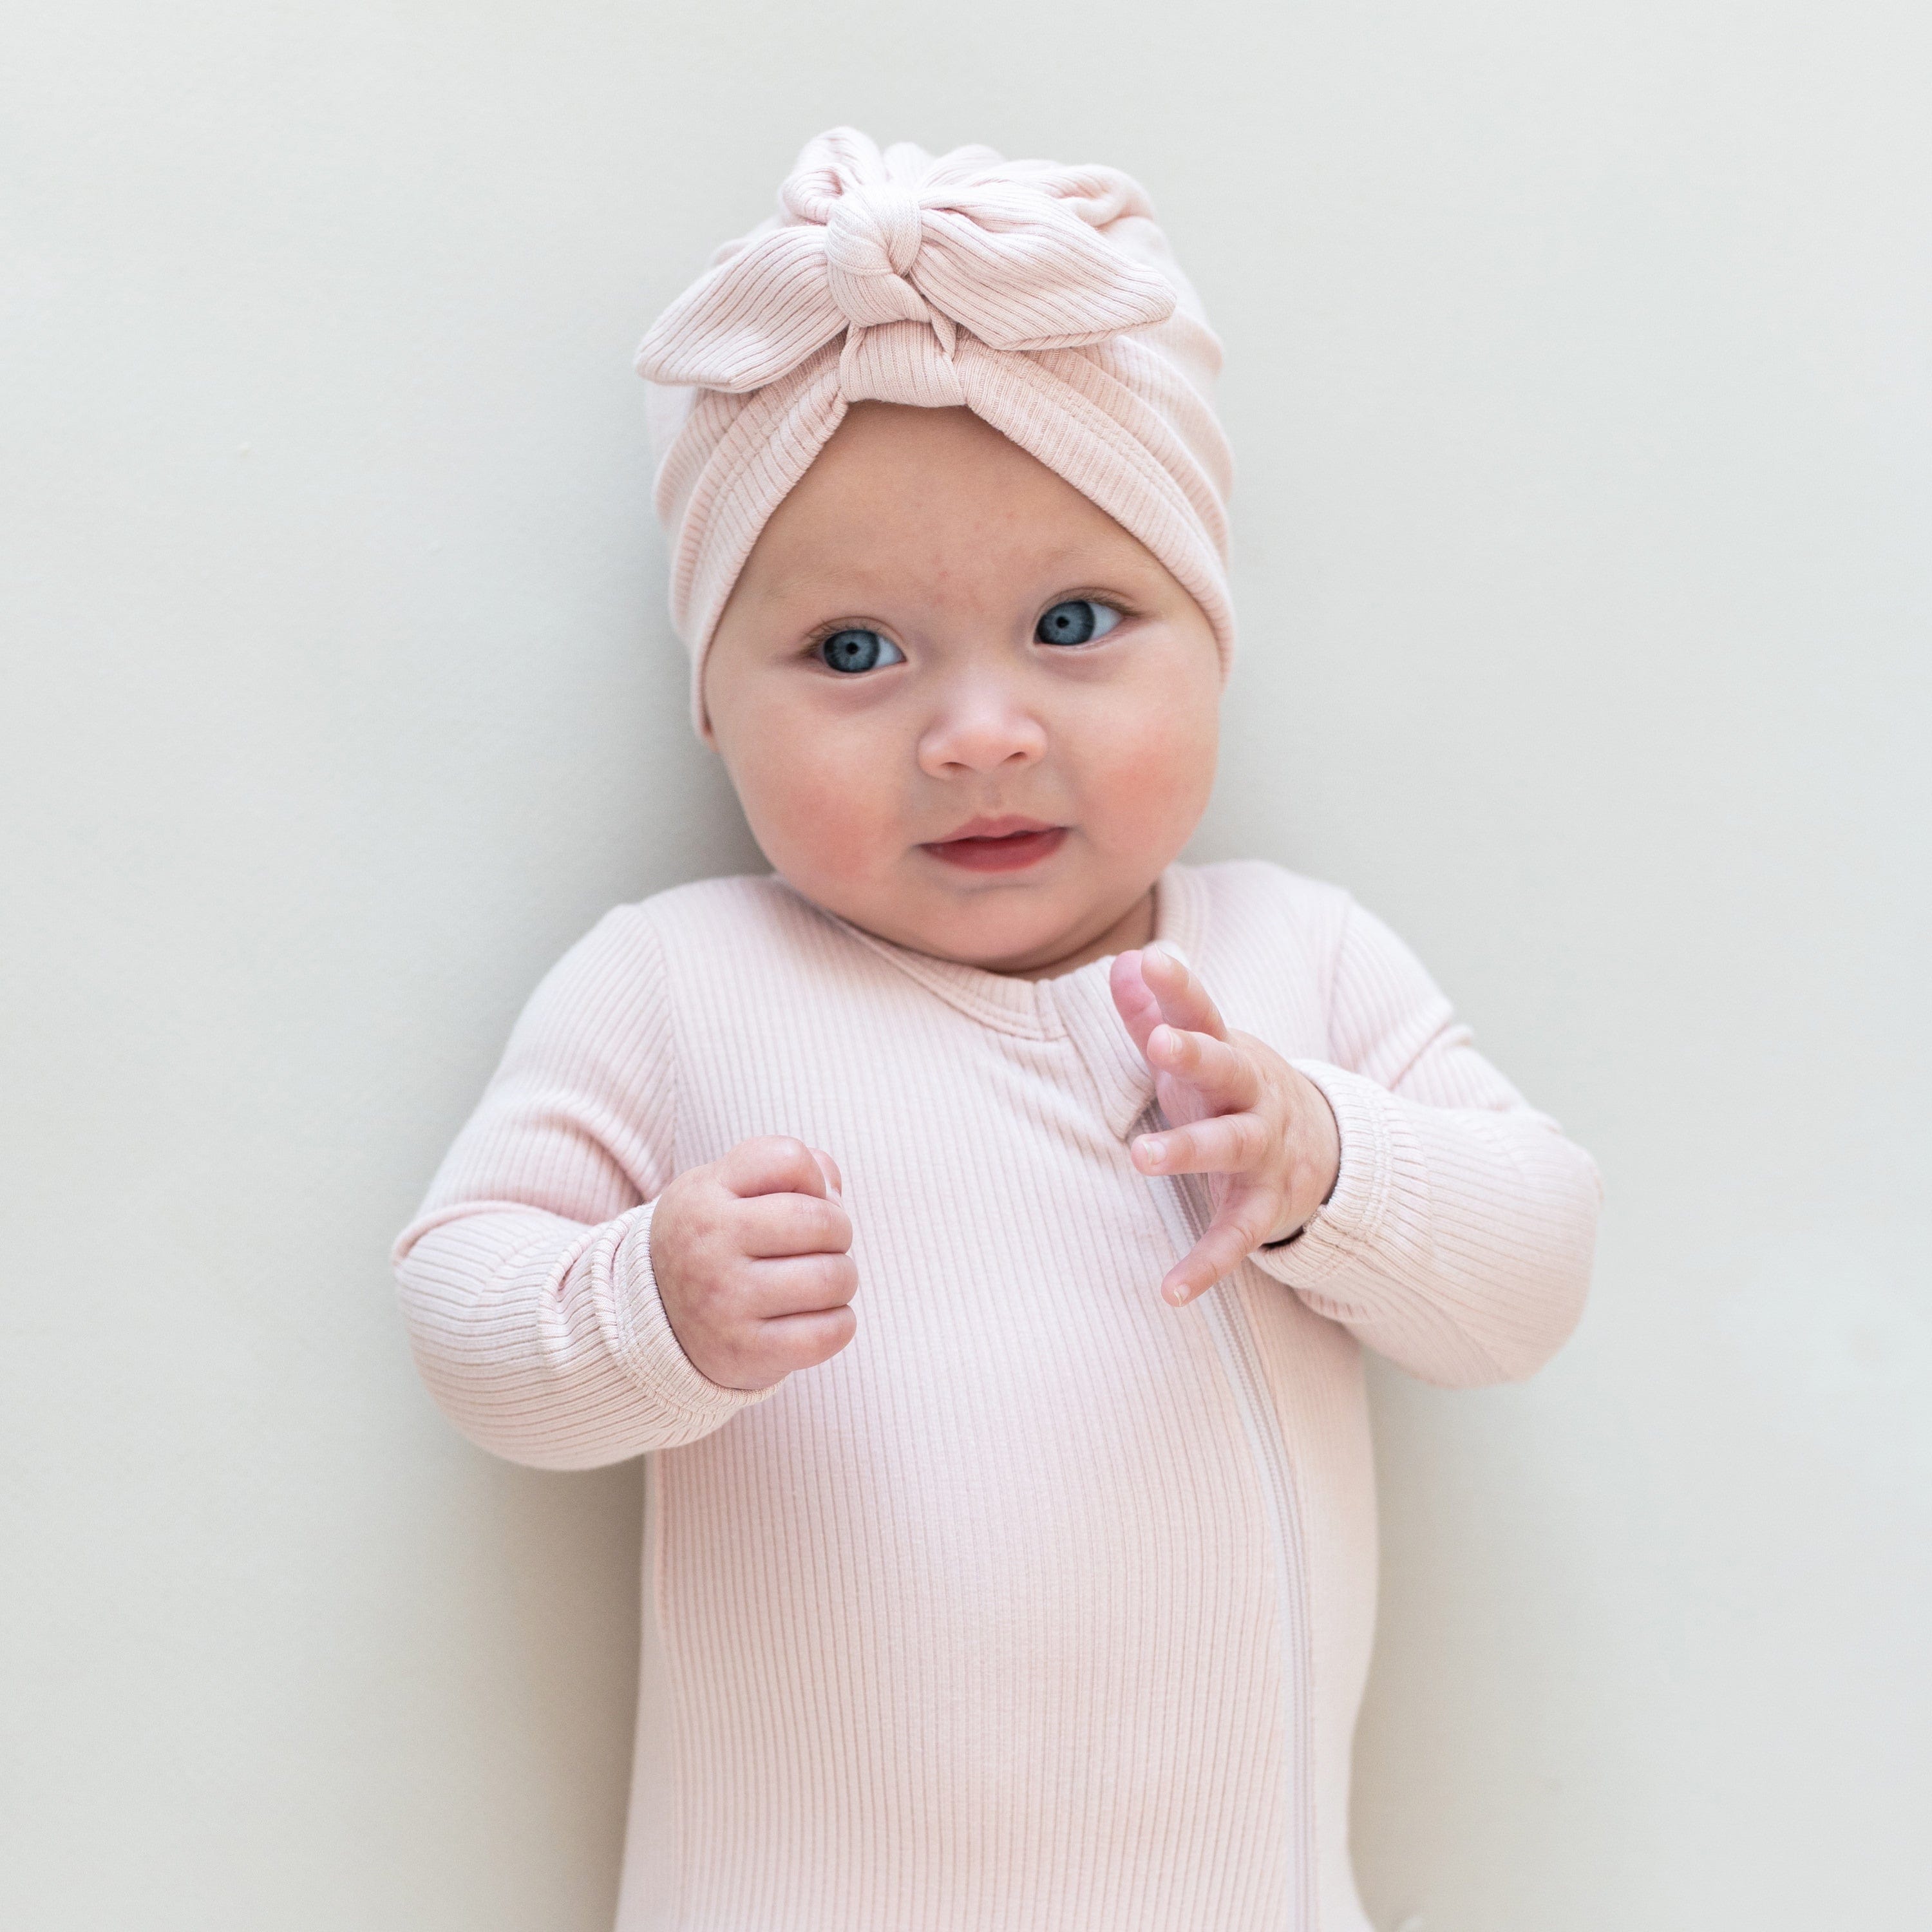 Baby wearing Kyte Baby bamboo Ribbed Zippered Footie pajamas in Blush